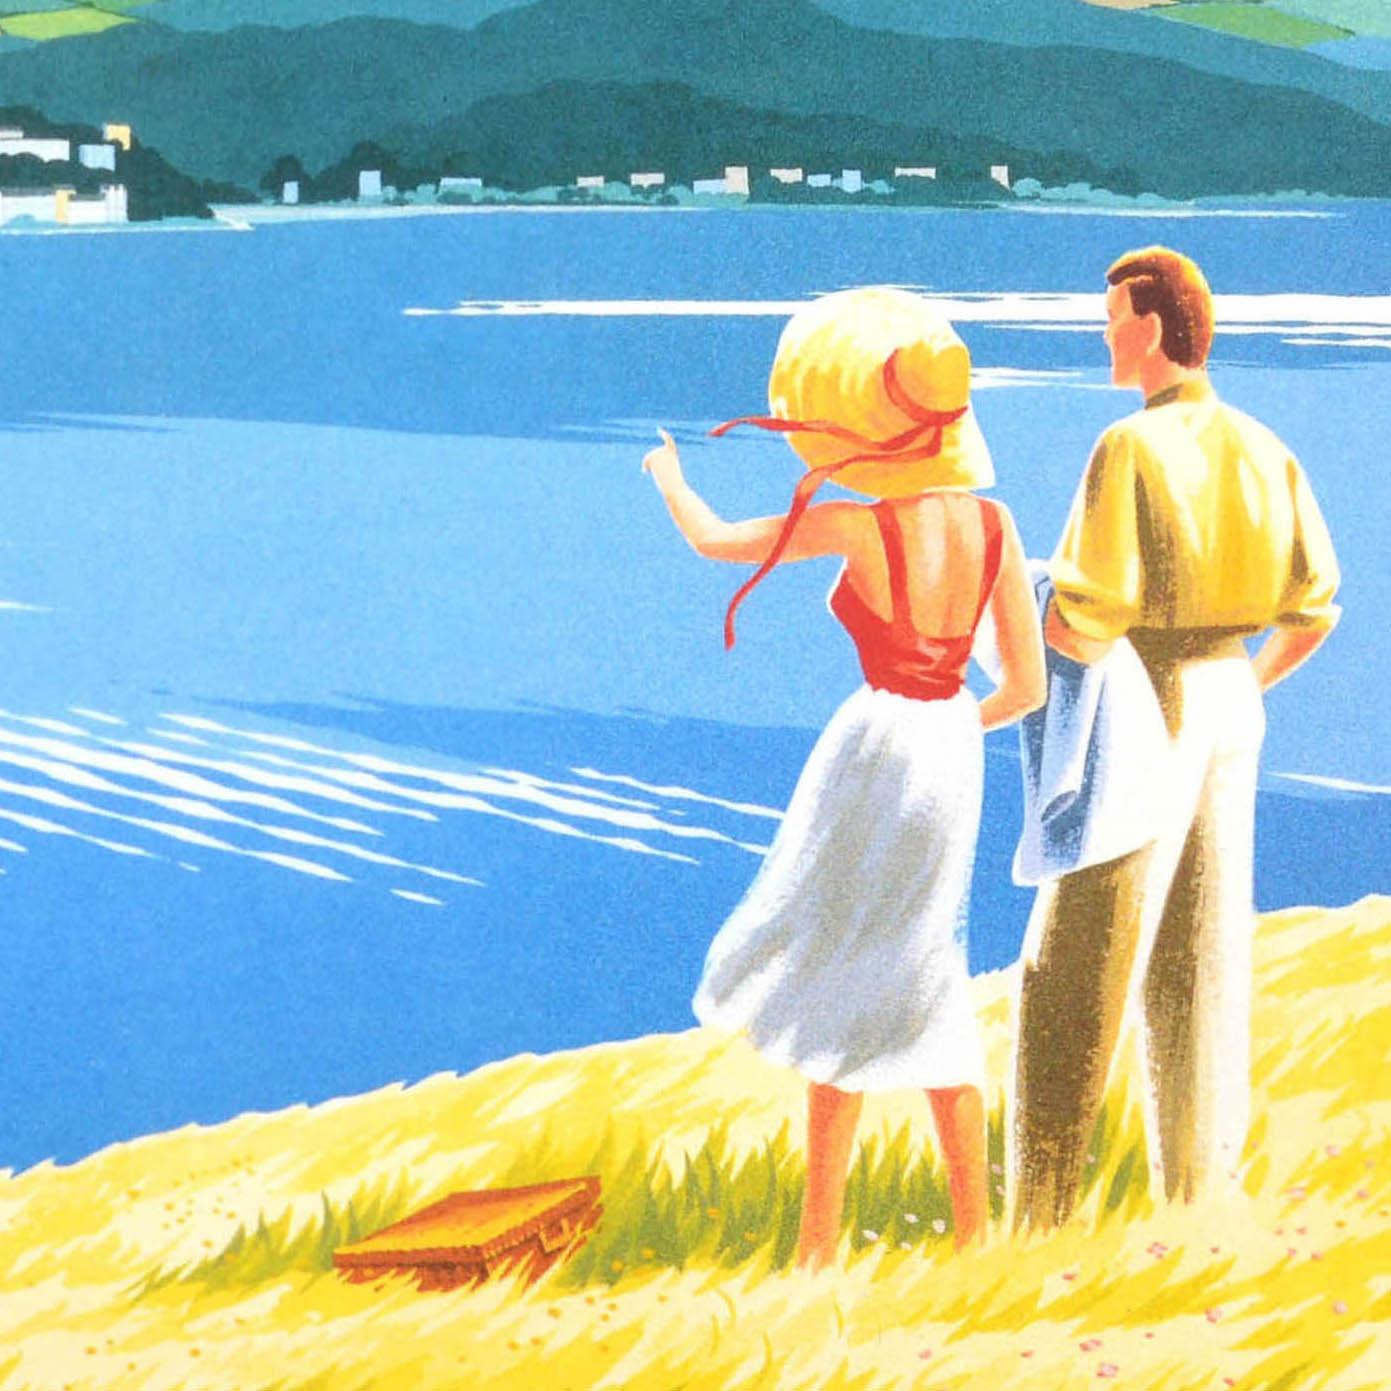 Original vintage travel advertising poster for the Isle of Man featuring a great image of a couple looking at the view from a hill in the foreground, a picnic hamper on the grass, the man holding his jacket over his arm and the lady in a straw hat